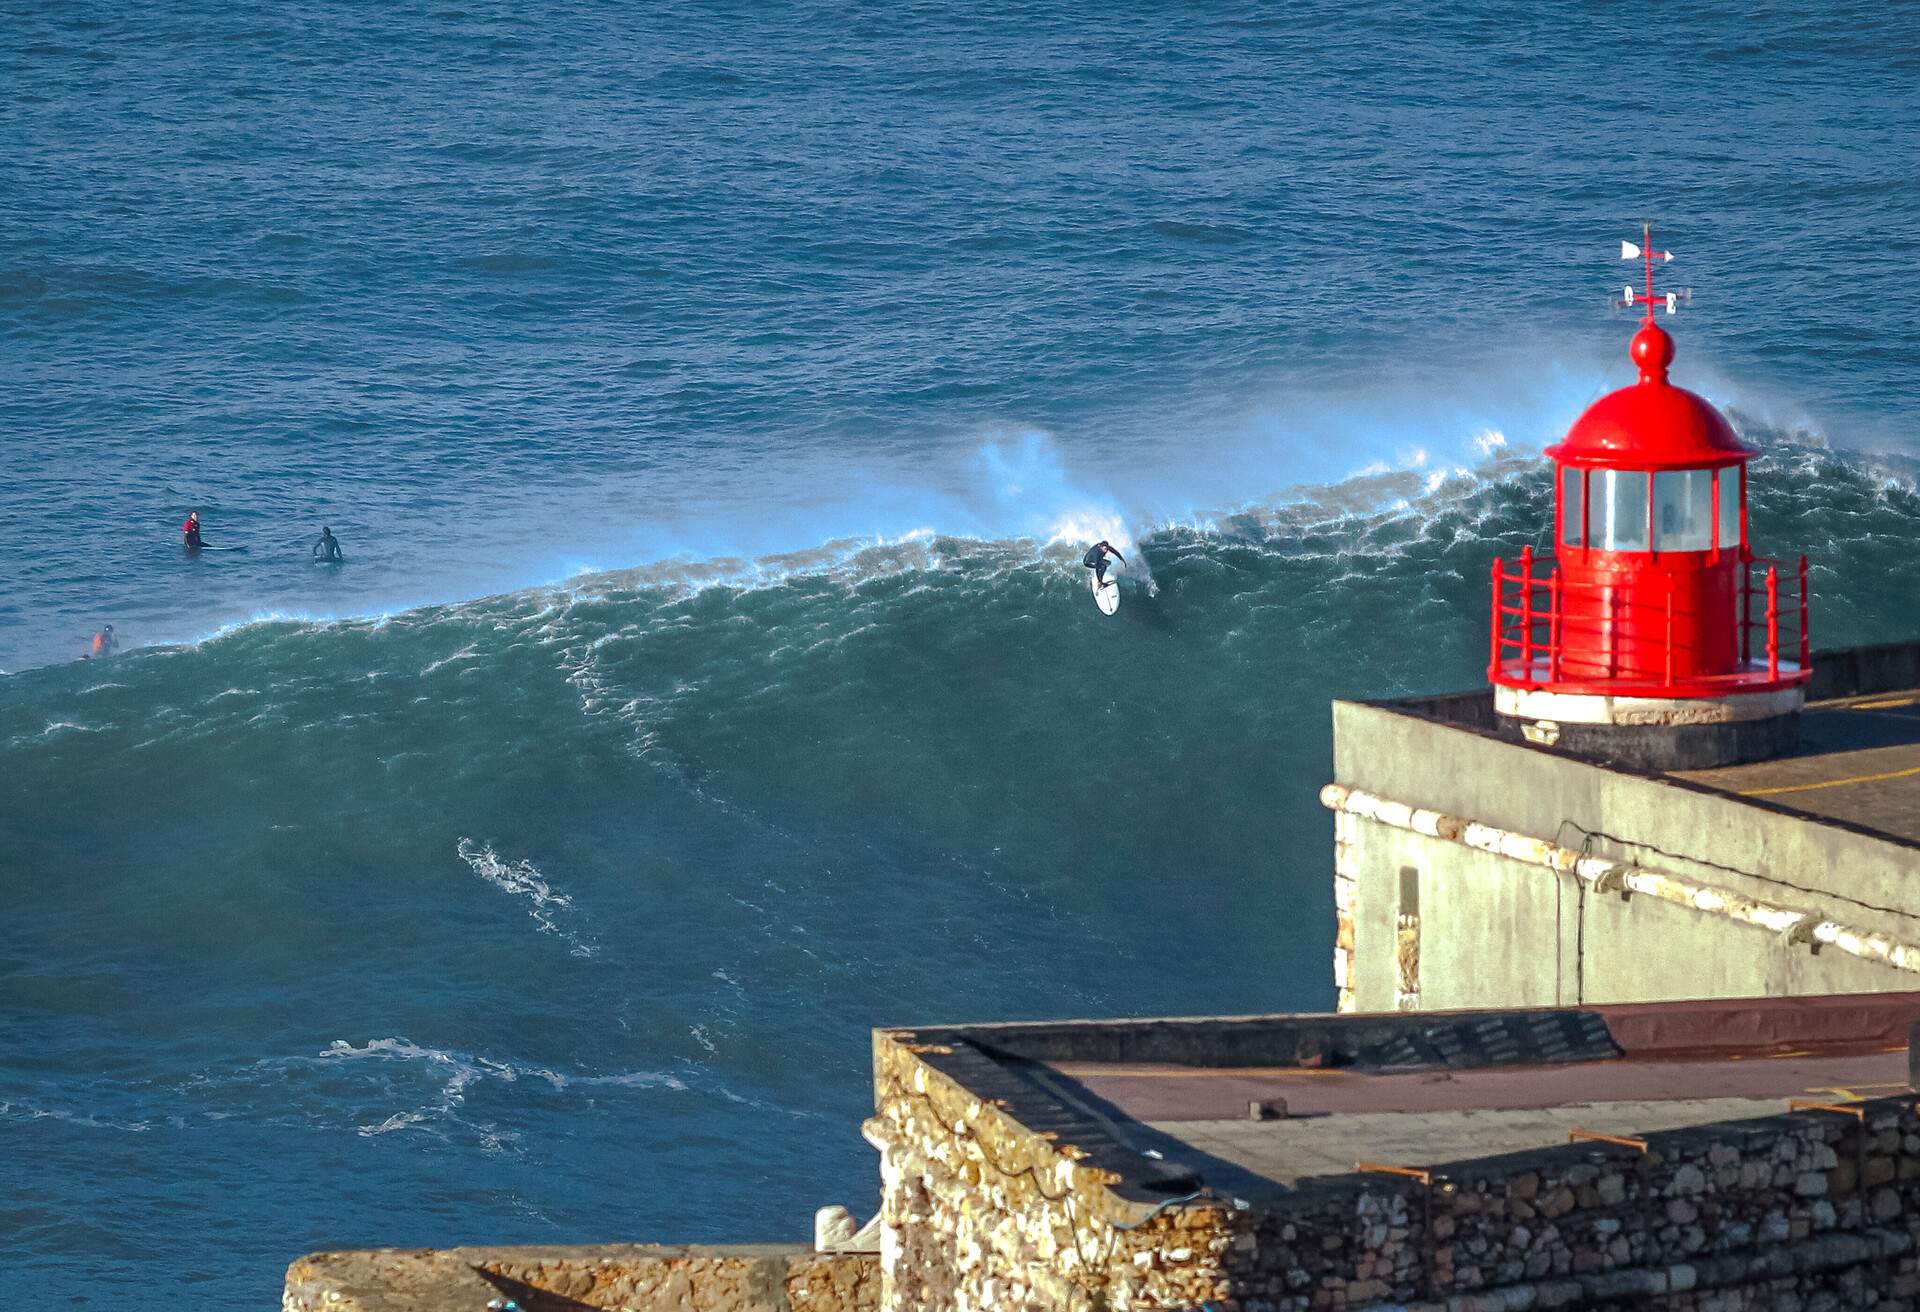 A red lighthouse overlooking the ocean with surfers riding the waves.